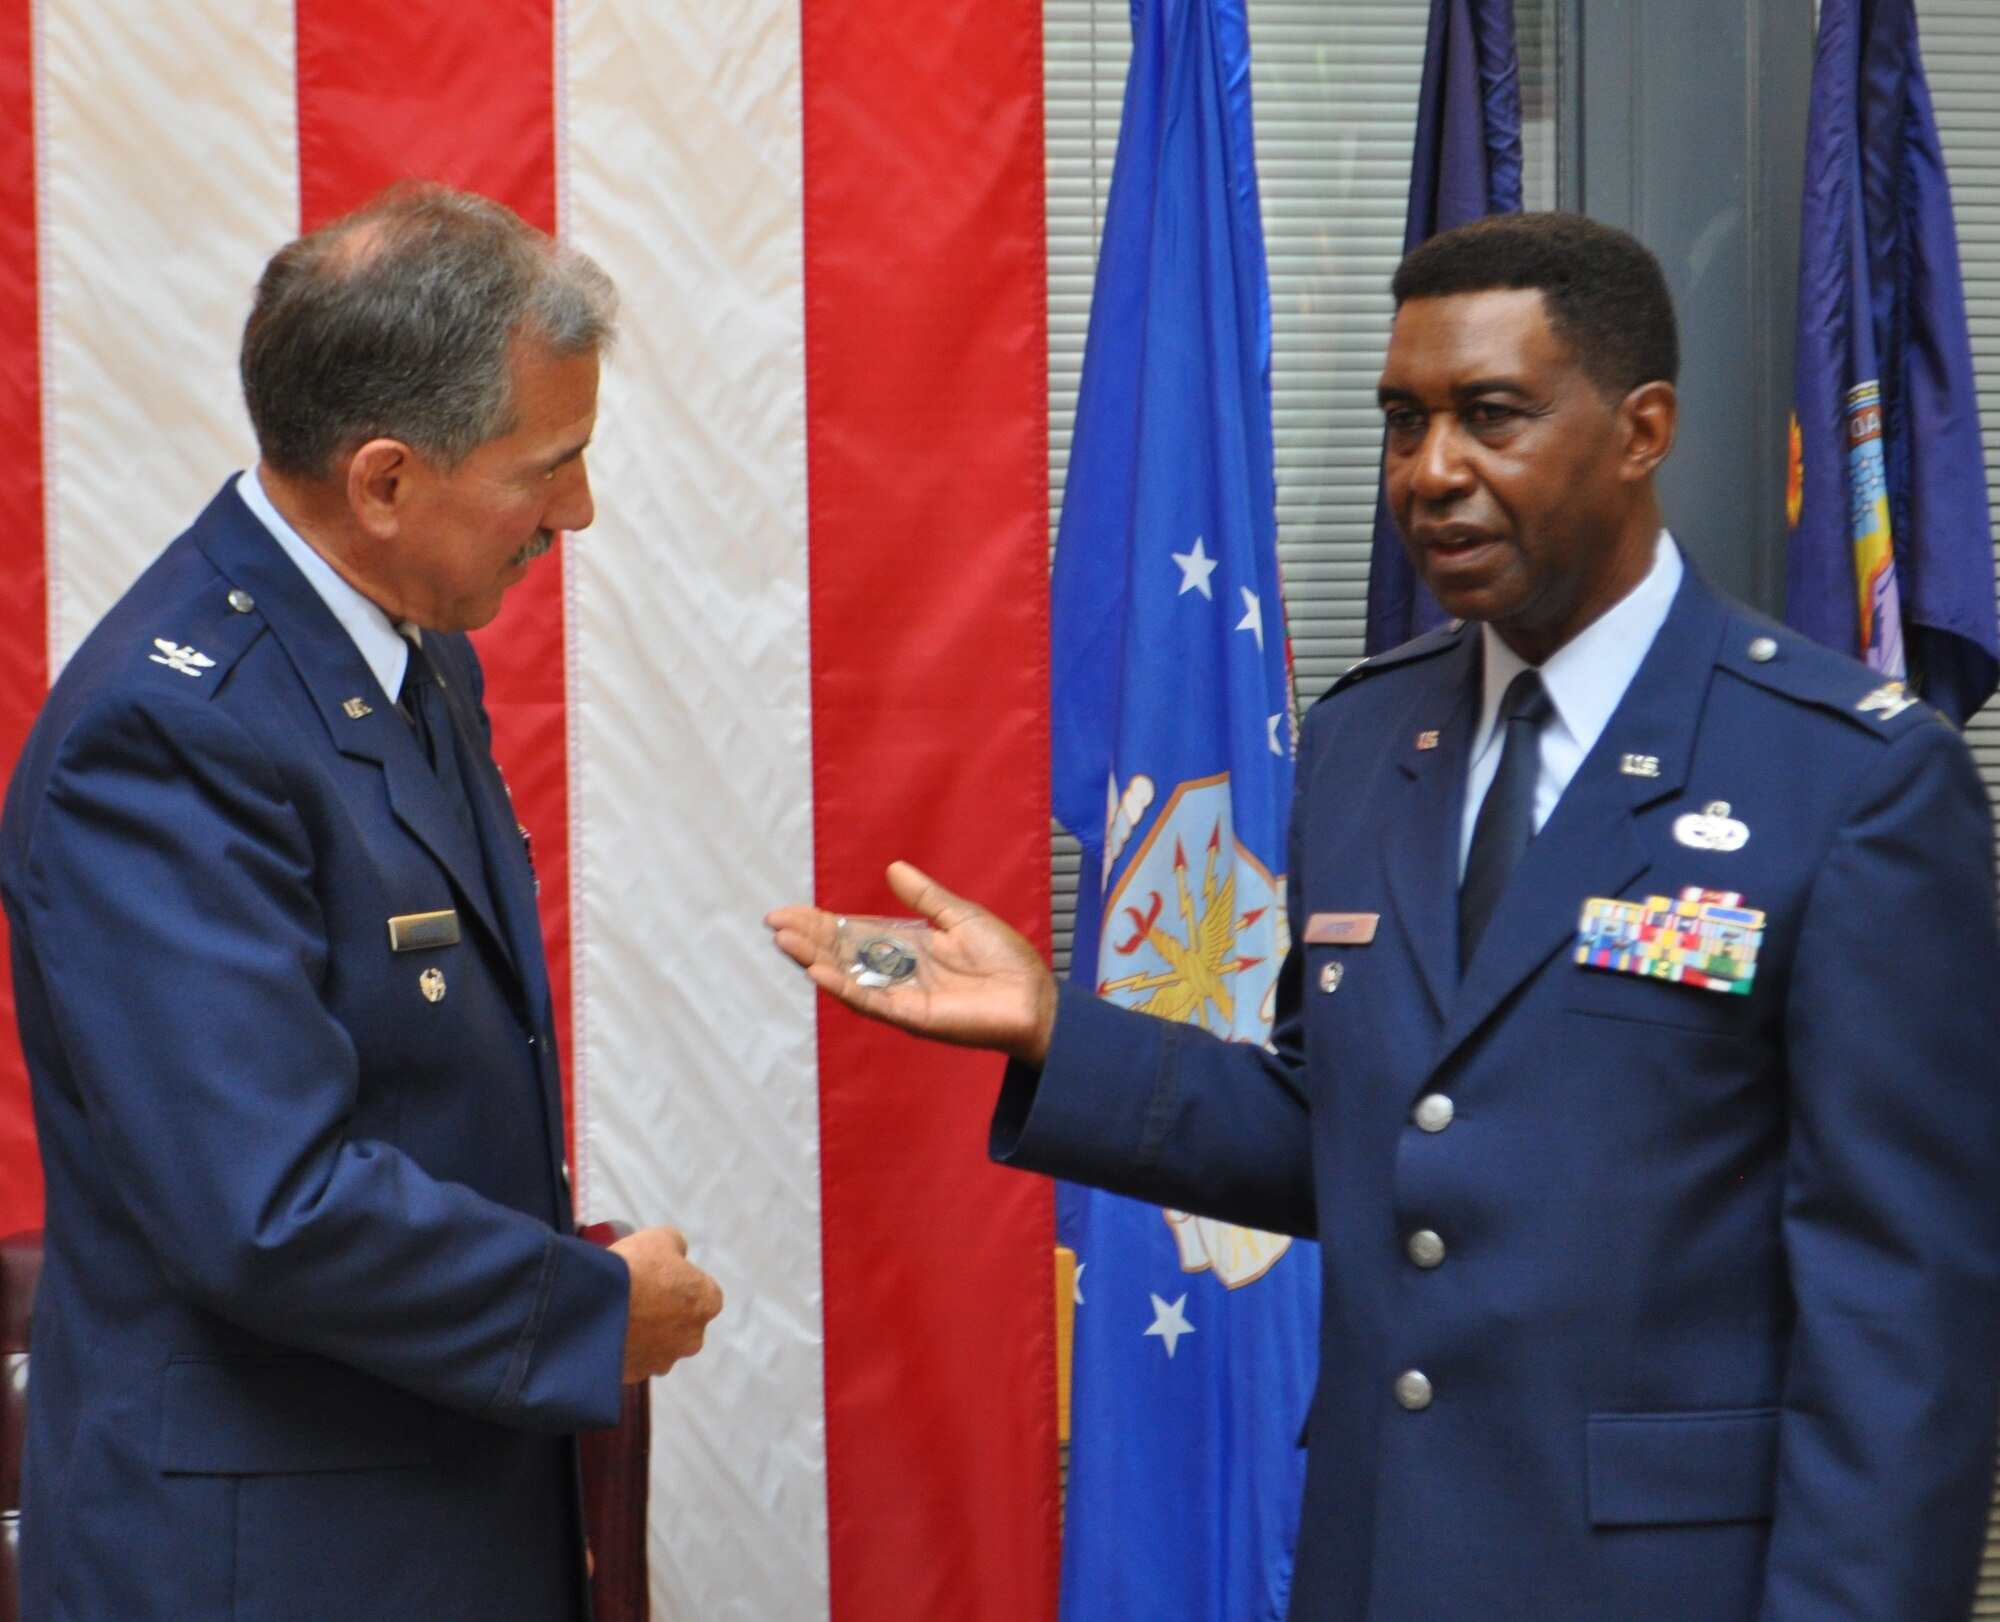 TRAVIS AIR FORCE BASE, Calif. -- Col. Melvin J. "Sonny" Giddings closed out a nearly 40-year career in service to his country June 8, 2014, at Travis Air Force Base, Calif. (U. S. Air Force photo / Ellen Hatfield) 